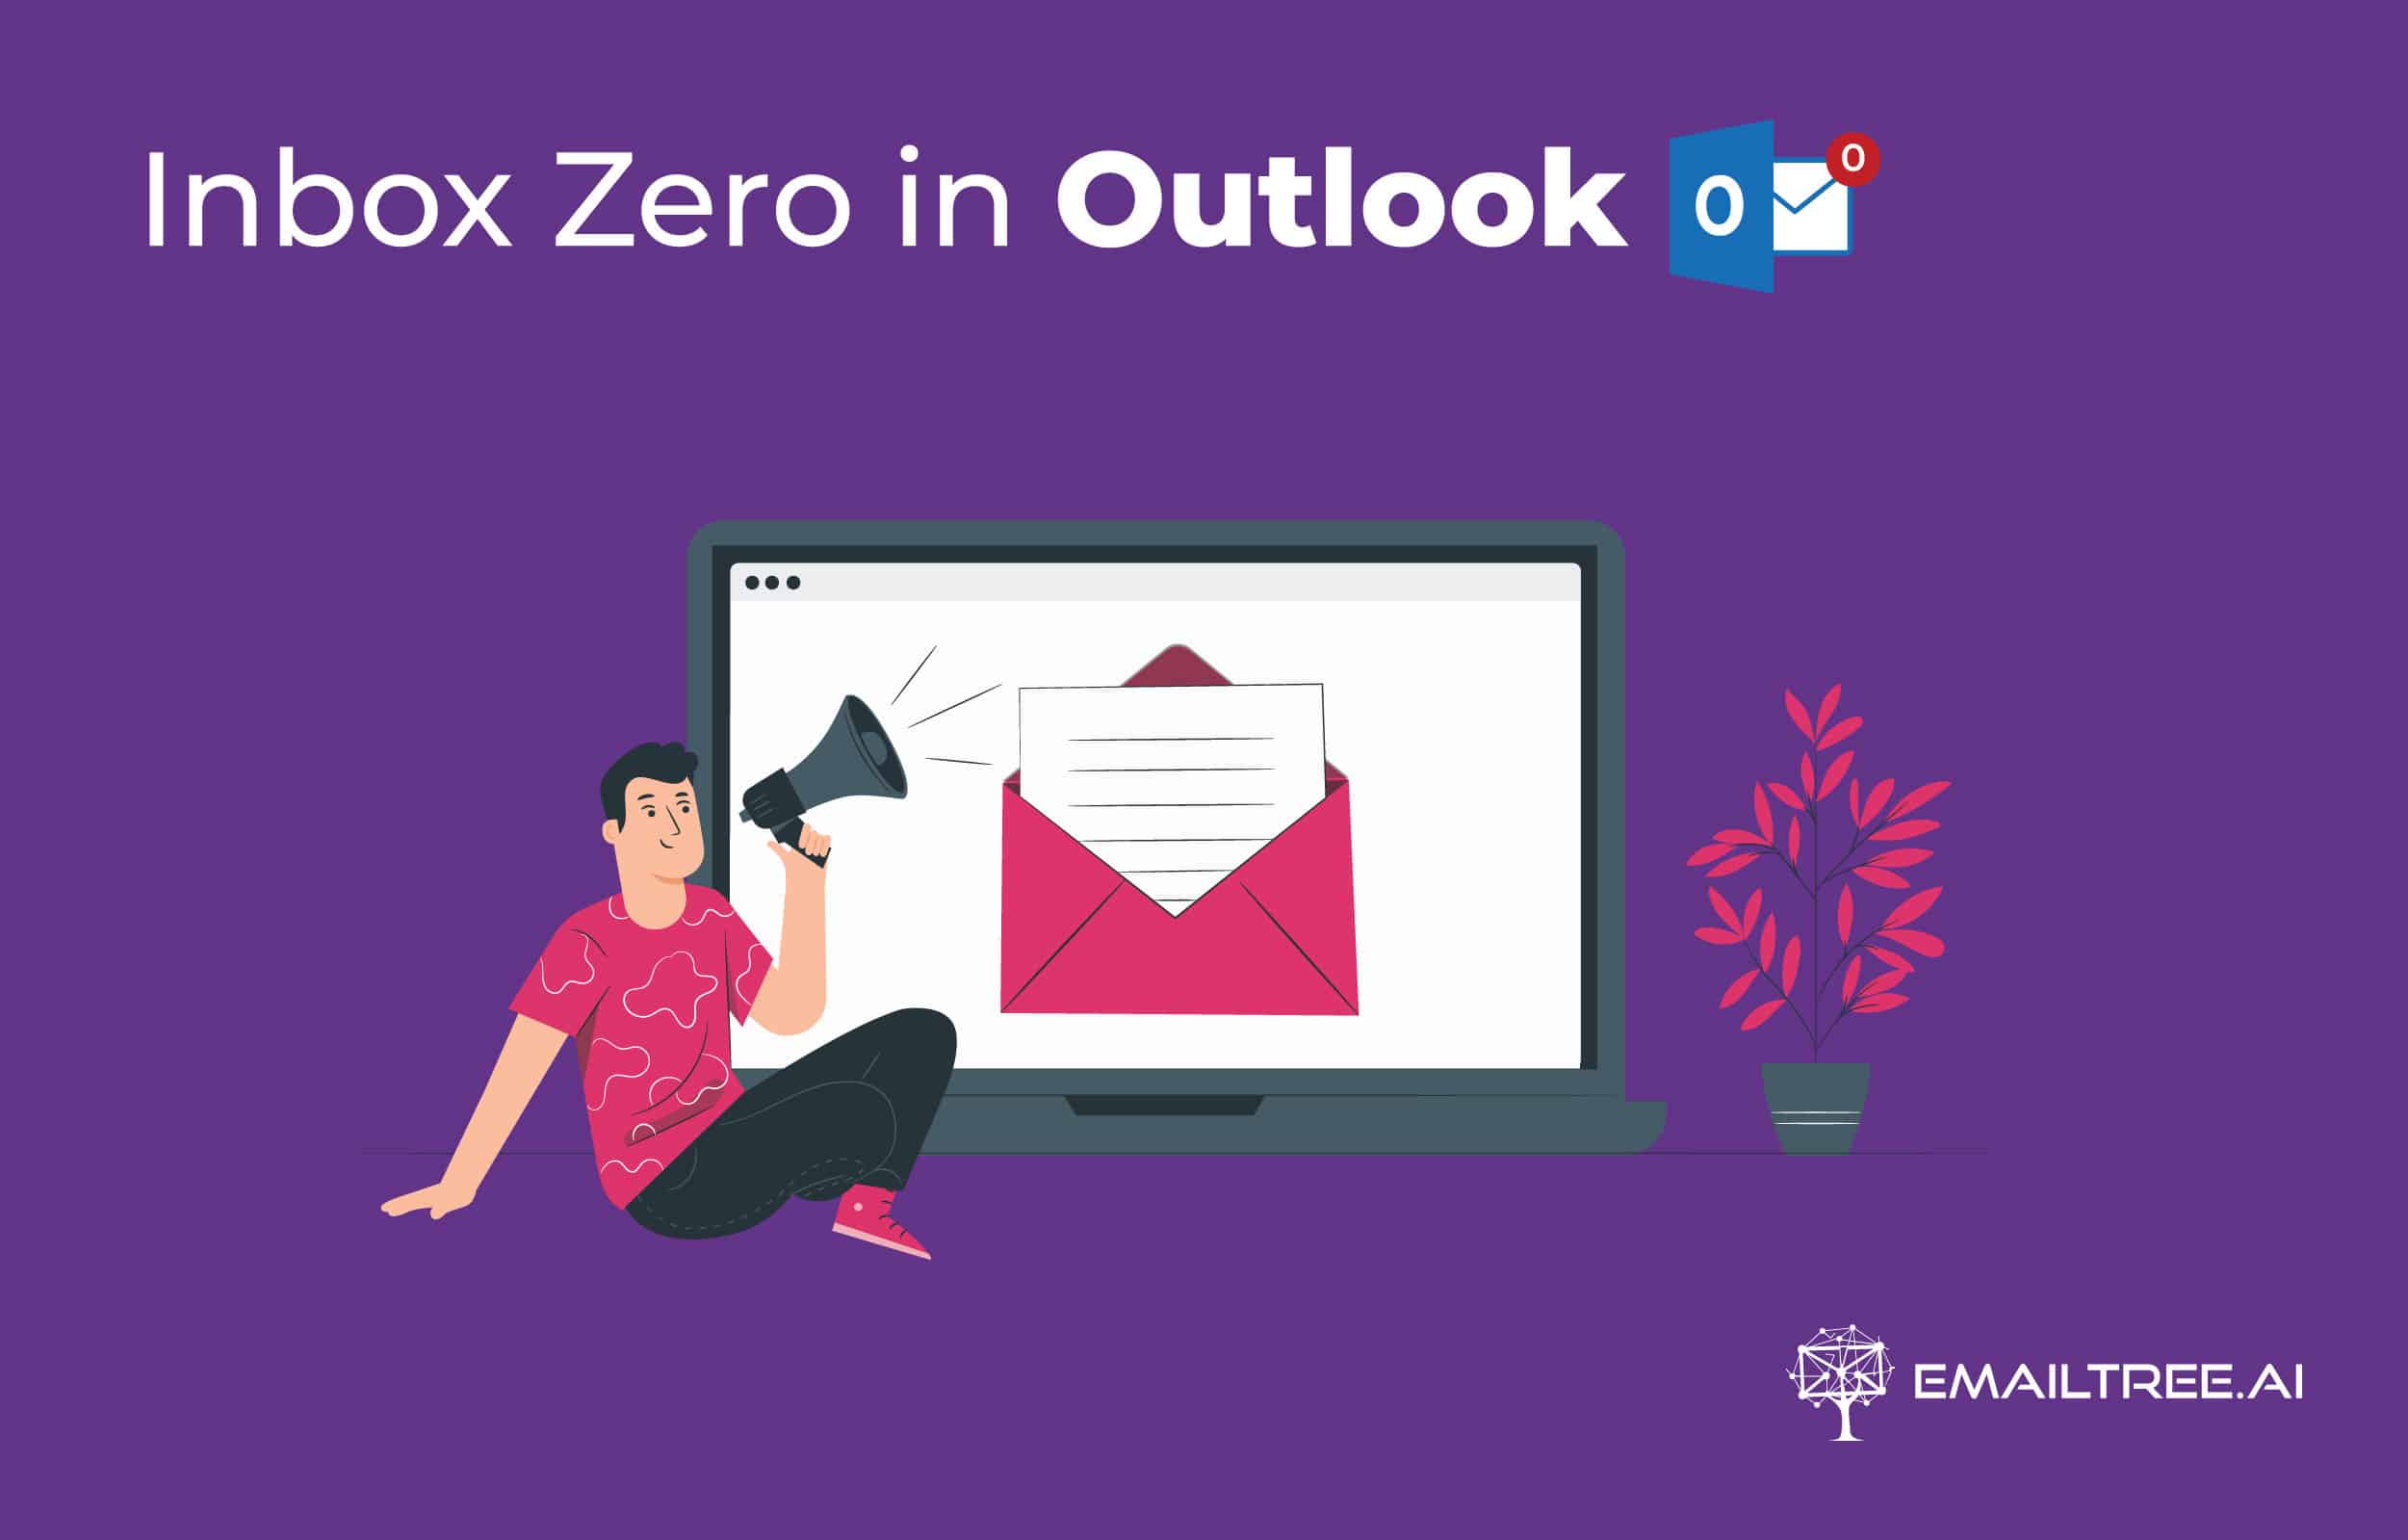 10-tips-for-customer-service-to-achieve-Inbox-Zero-in-Outlook-high-def